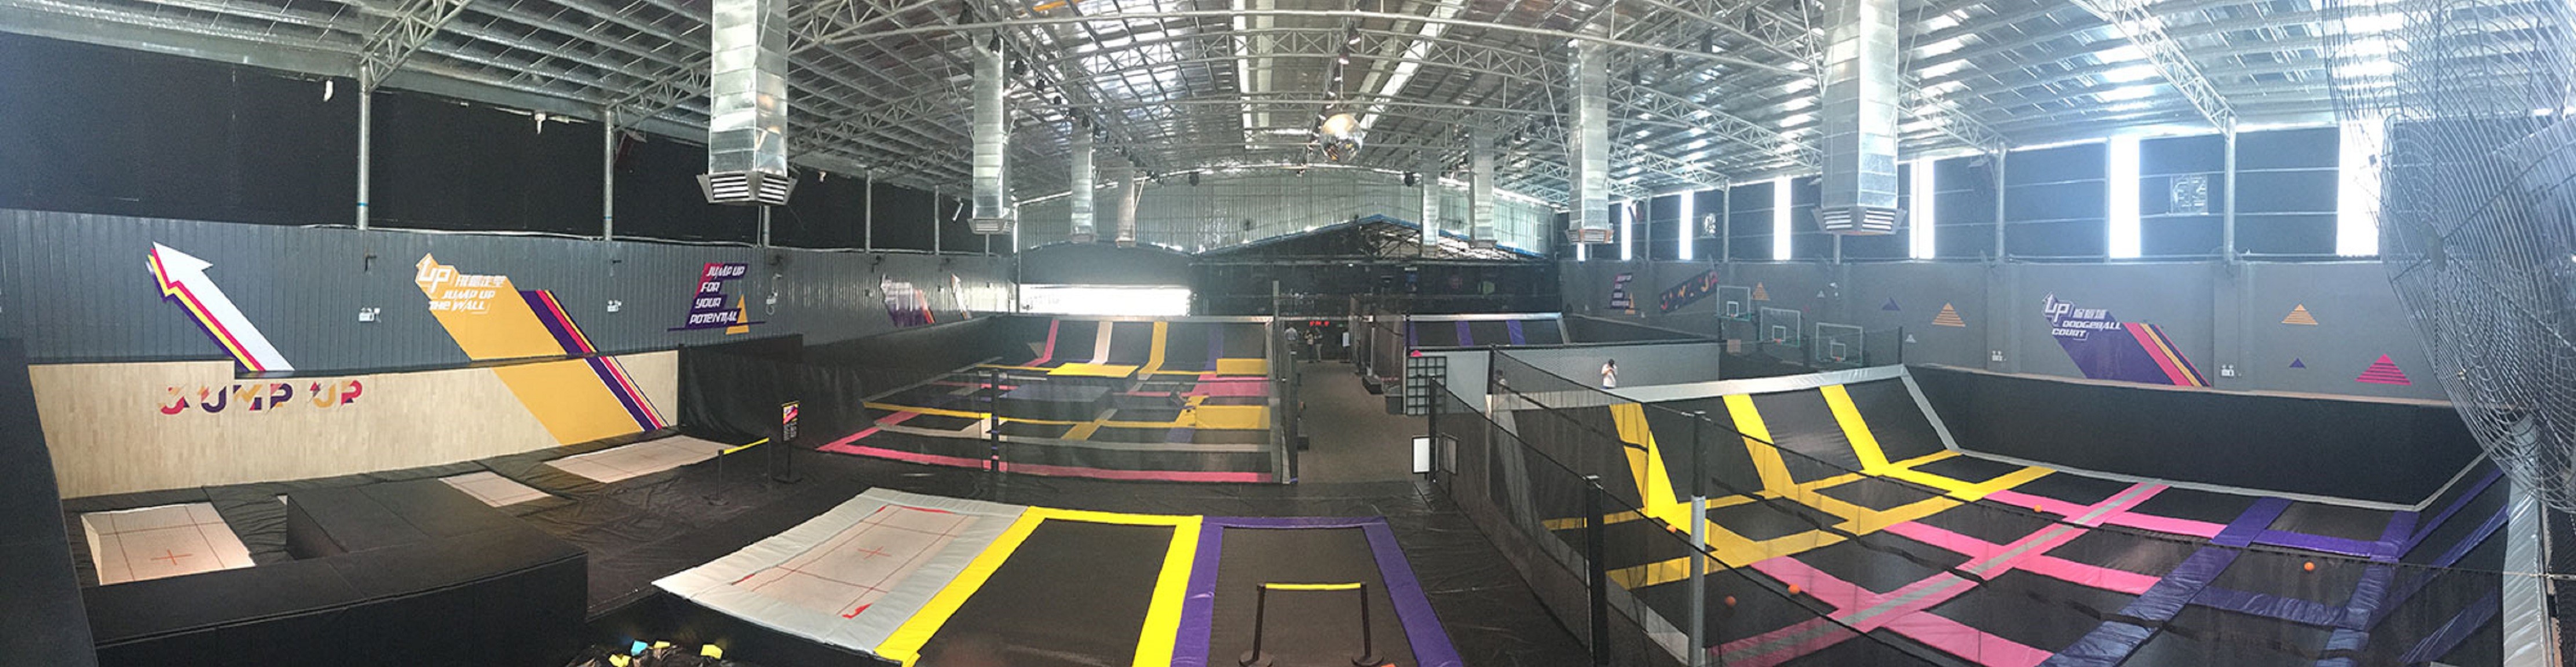 Trampoline Park Newly Opened in Guangzhou